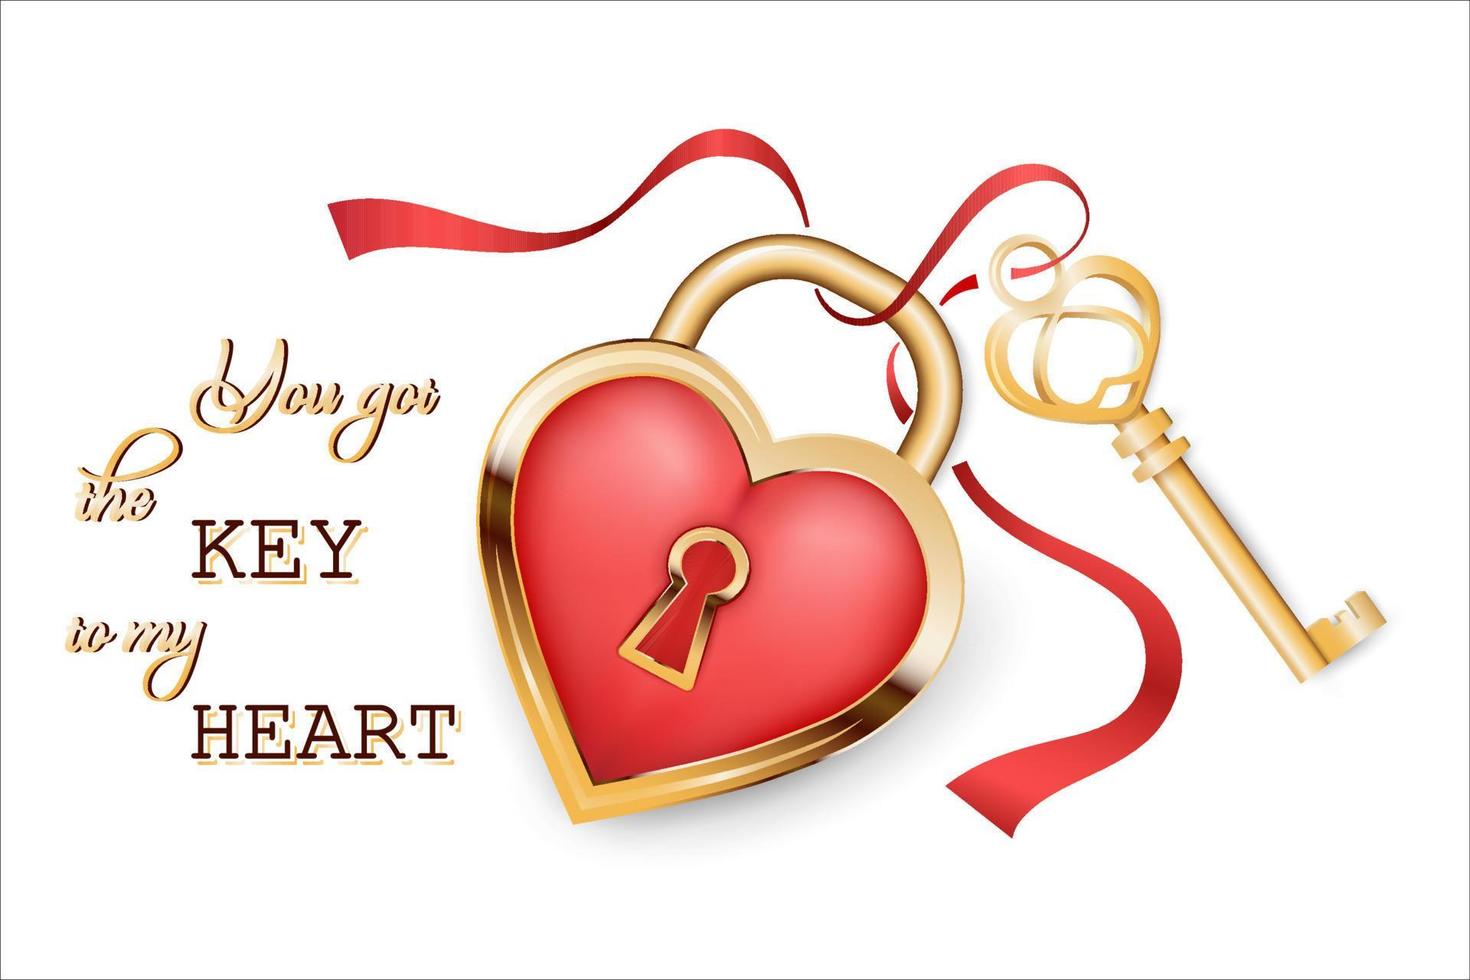 Key to my heart in realistic style isolated on white background. Valentine's day. Golden text lettering. Holiday concept. Vector